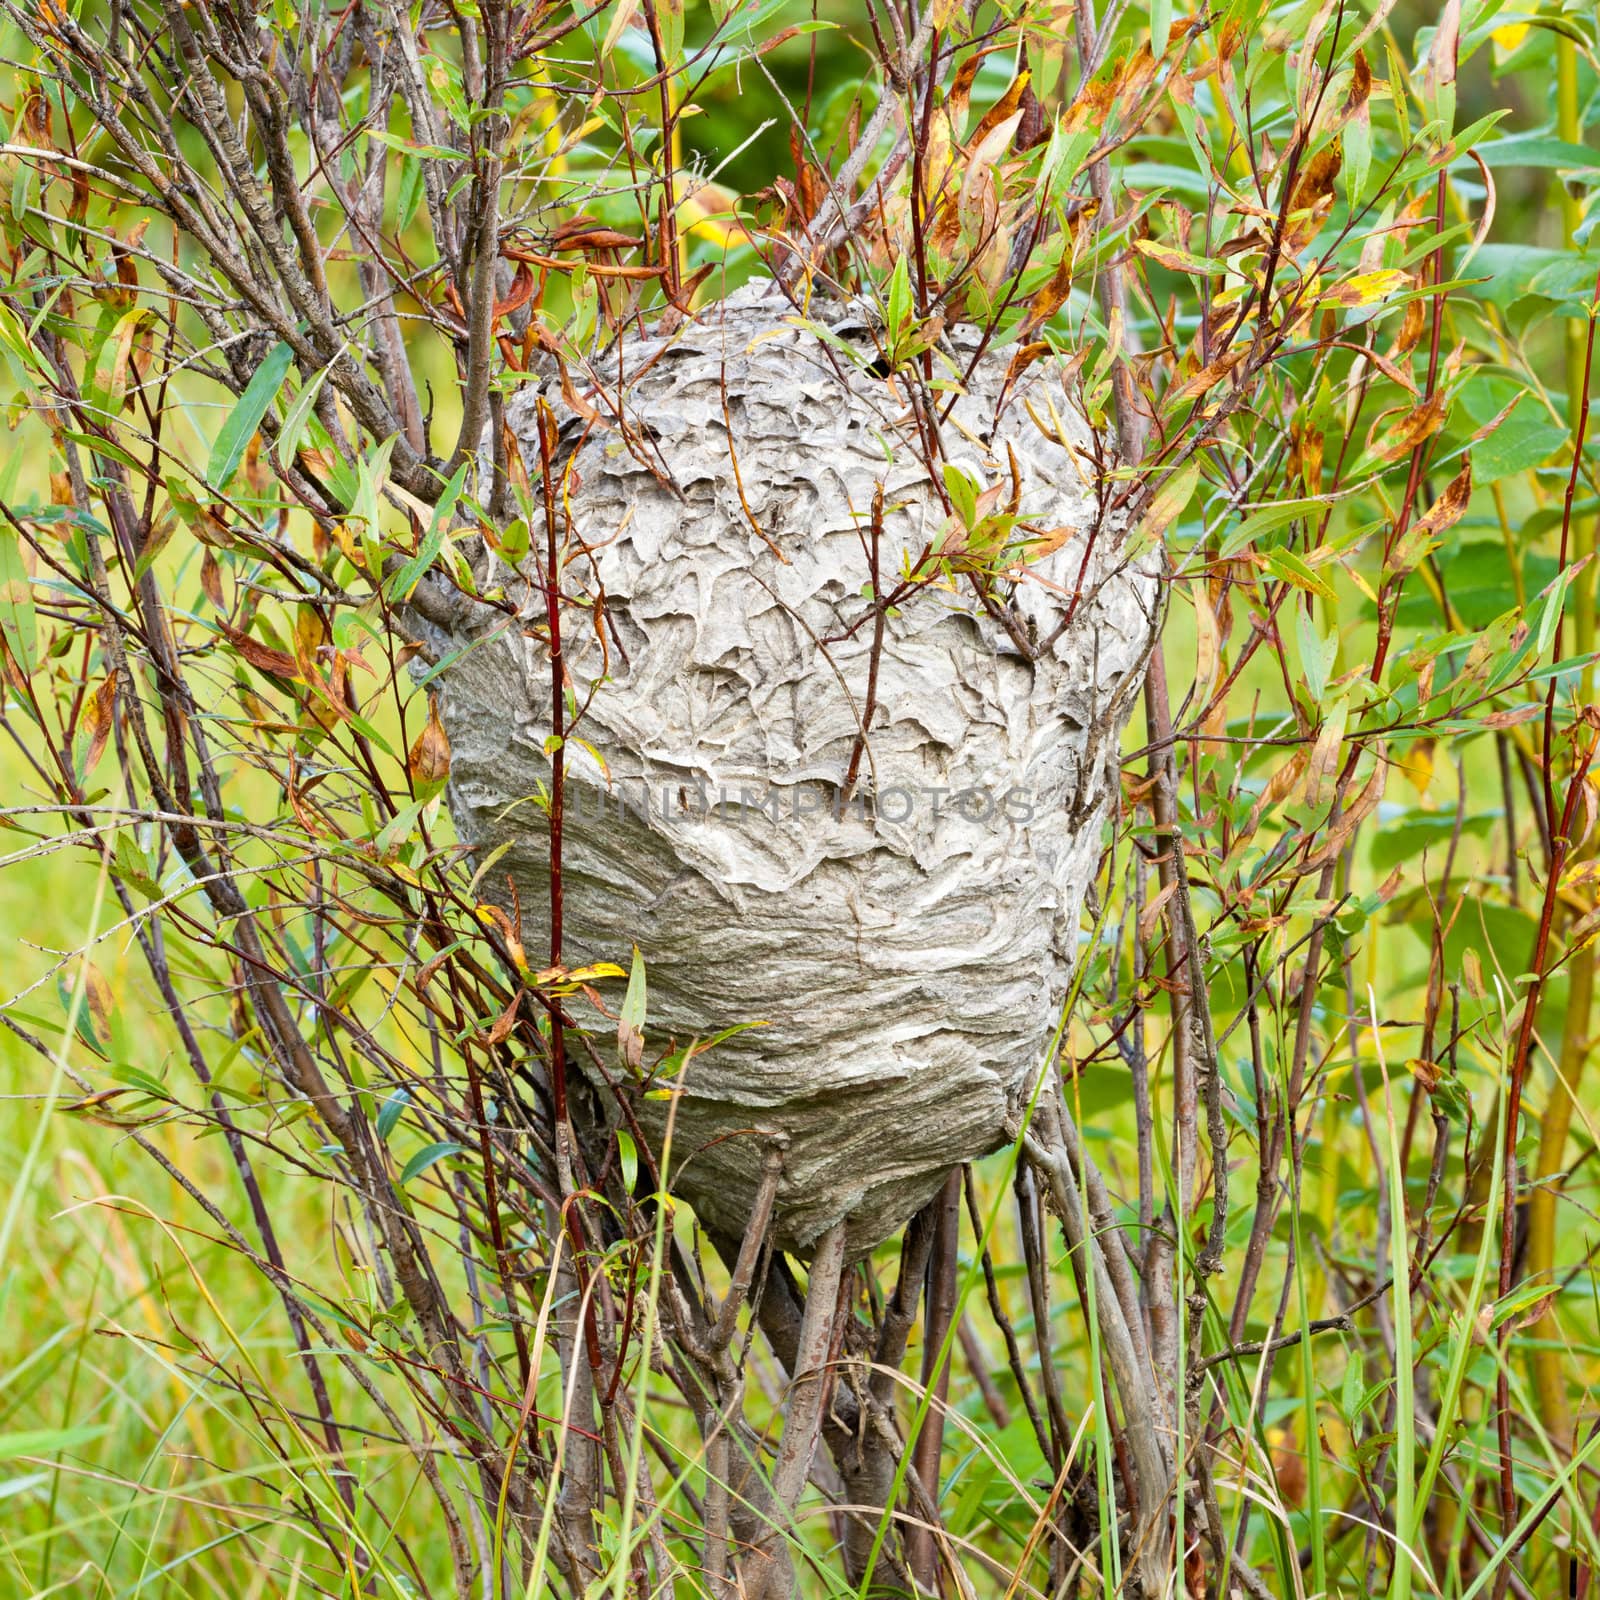 Huge grey papery social wasp's nest built in and attached to willow bush